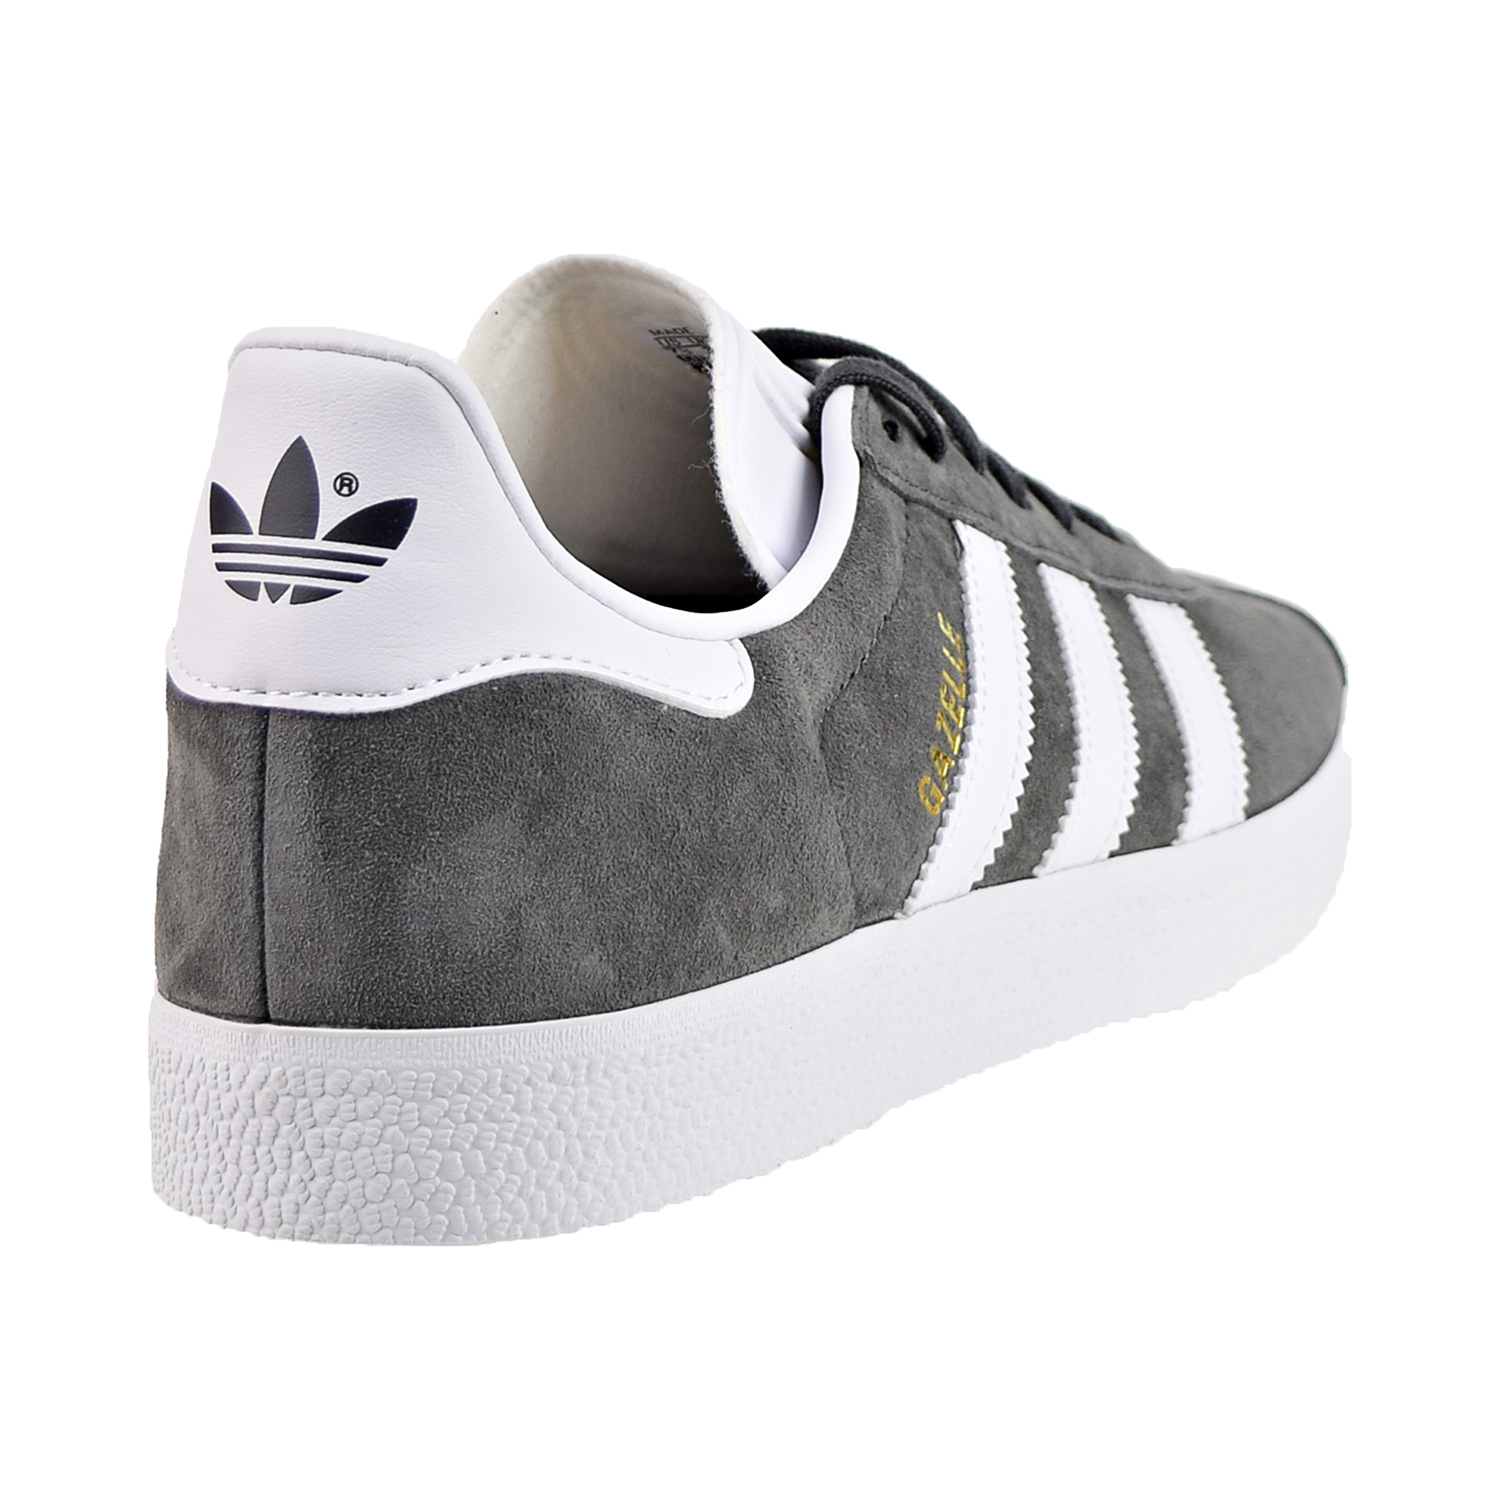 discord Strawberry Issue Adidas Gazelle Mens Shoes Solid Grey-White-Gold Metallic bb5480